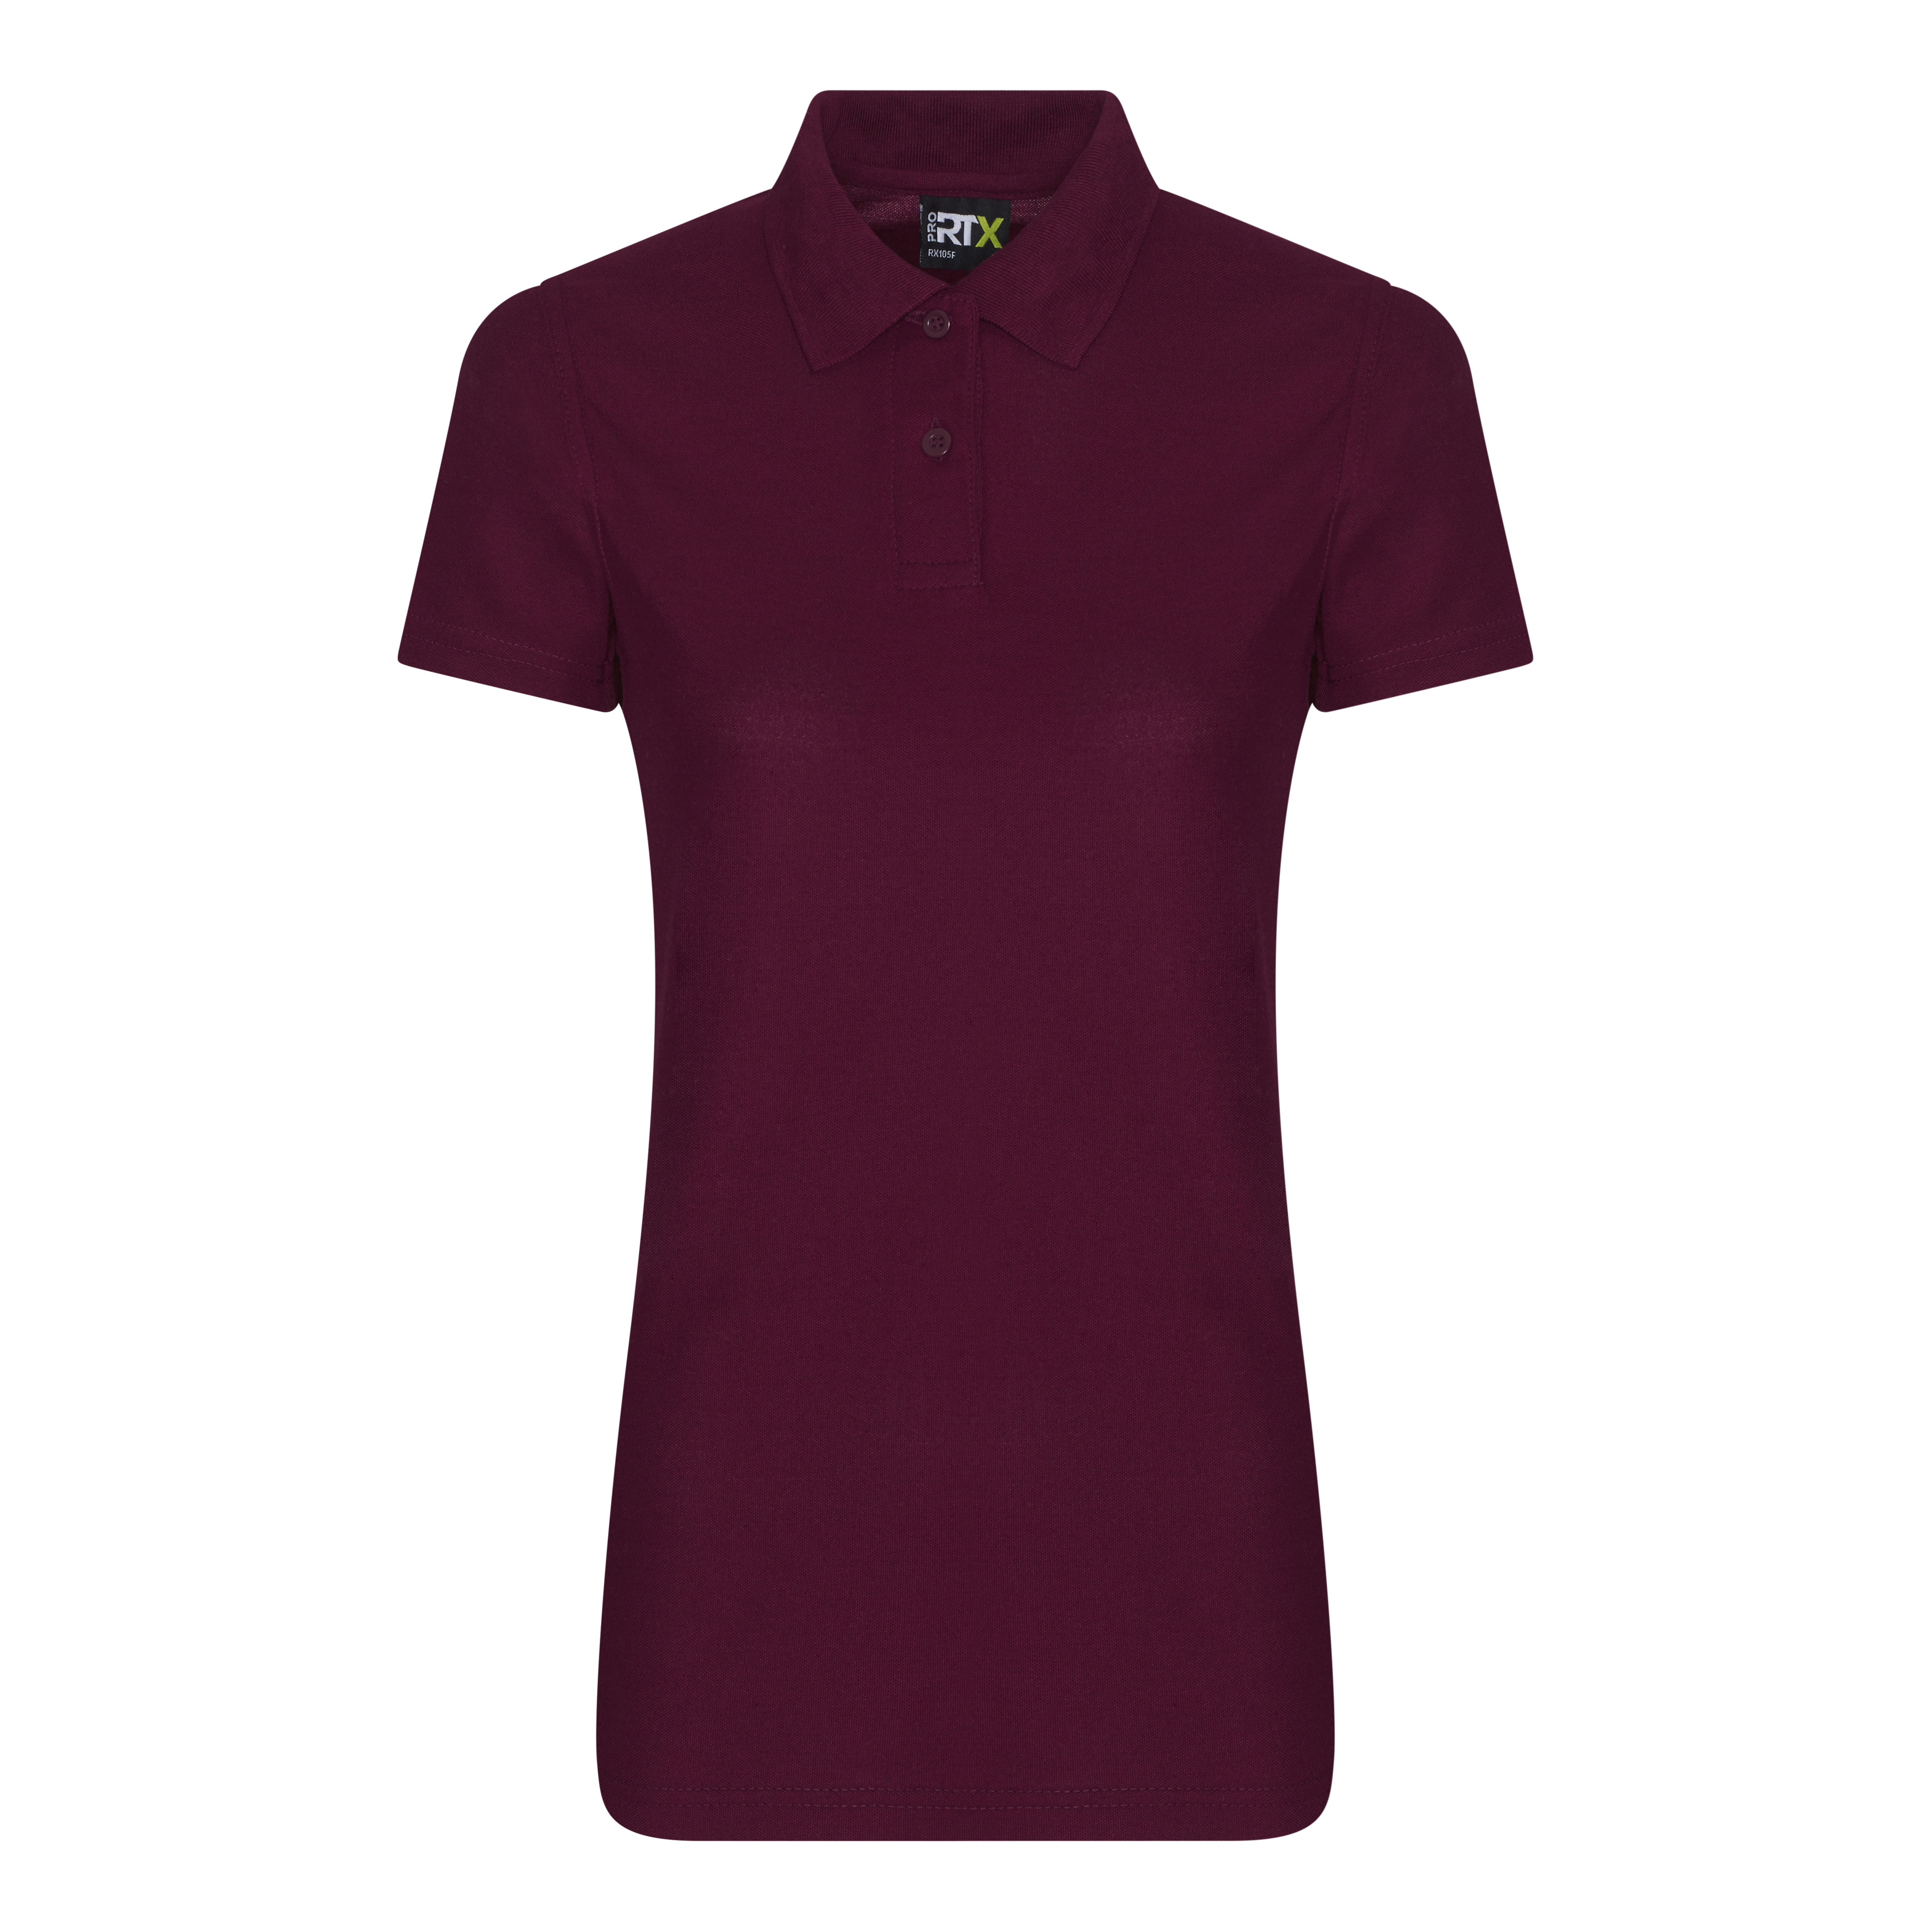 ax-httpswebsystems.s3.amazonaws.comtmp_for_downloadpro-rtx-womens-pro-polyester-burgundy.jpg